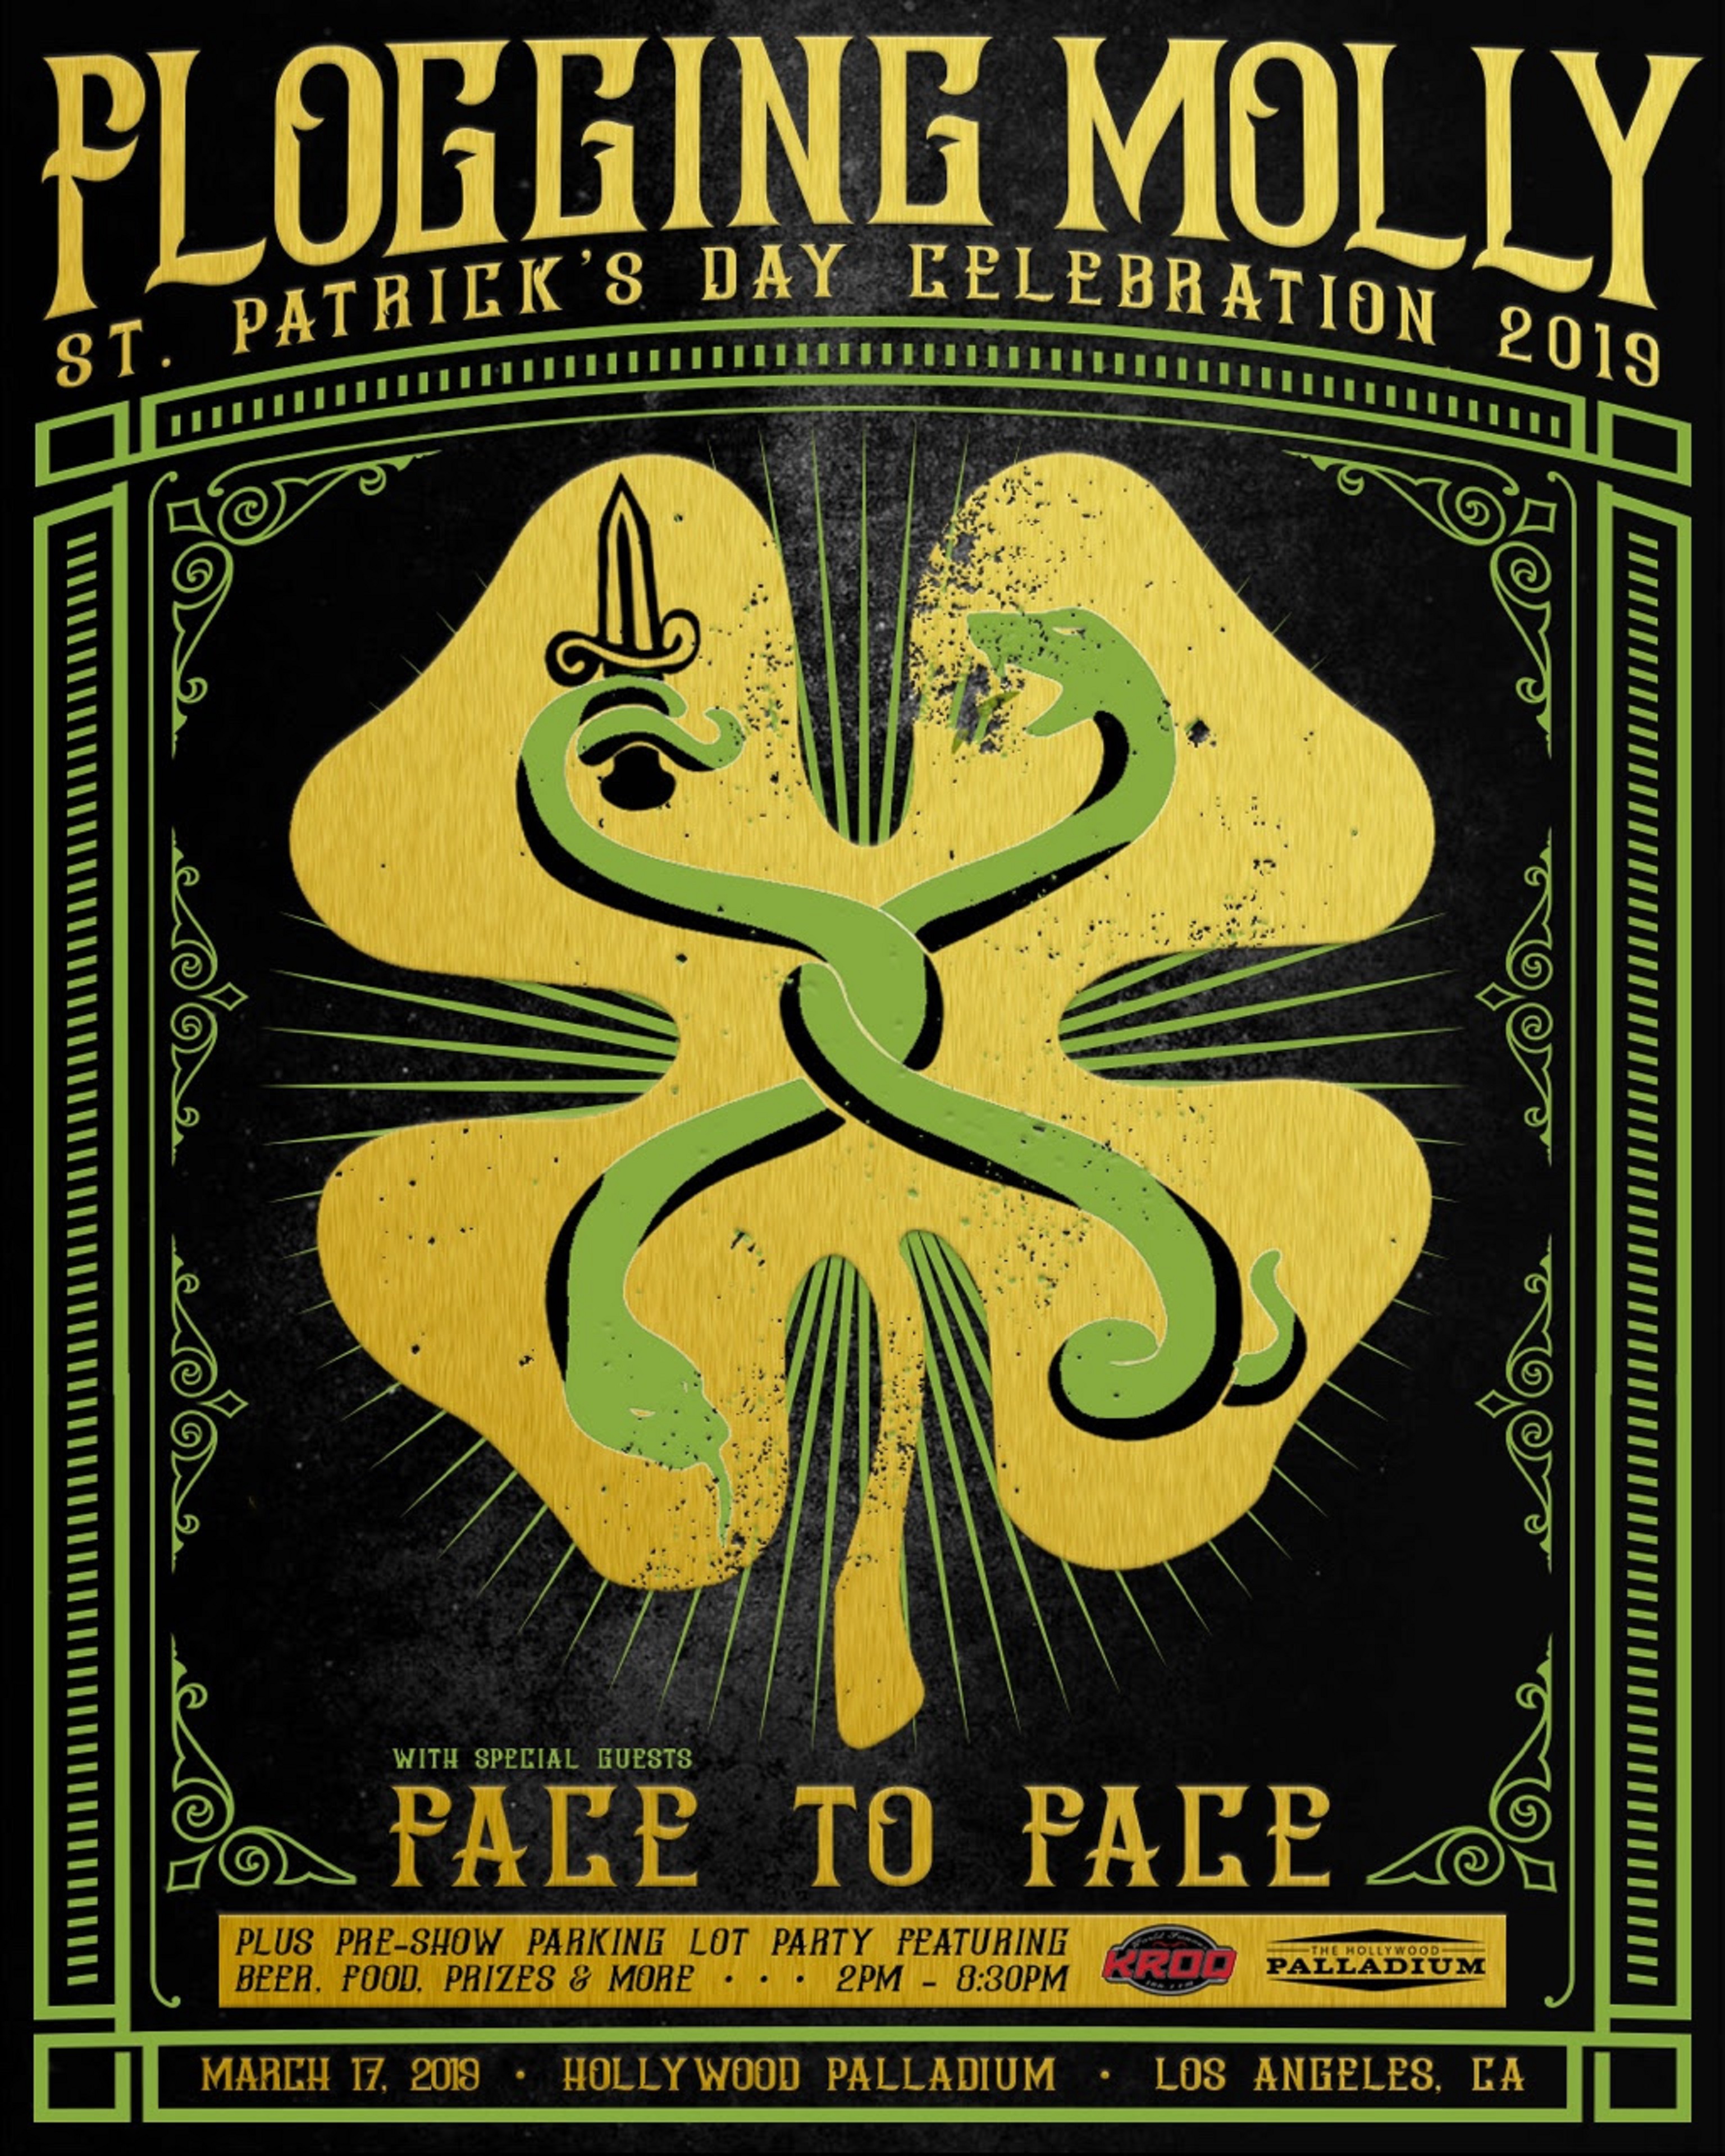 FLOGGING MOLLY Announces 5th Annual St. Patrick's Day Celebration